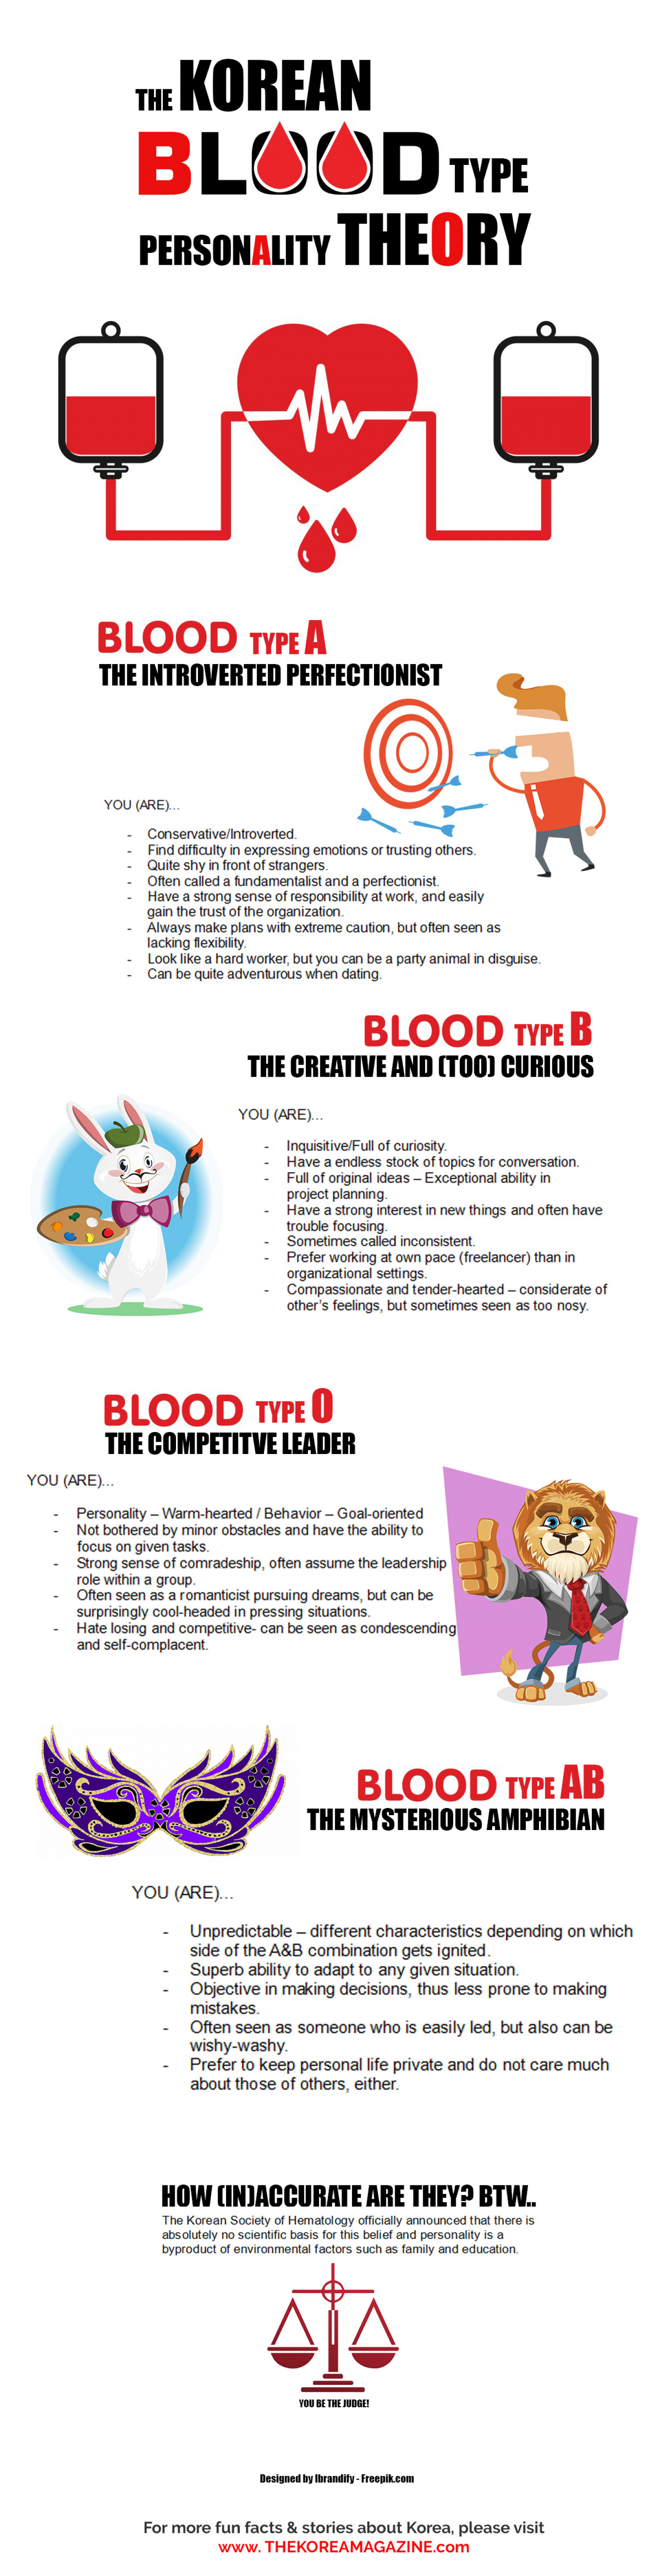 Is It Accurate? The Blood Type - Personality Theory Infographic